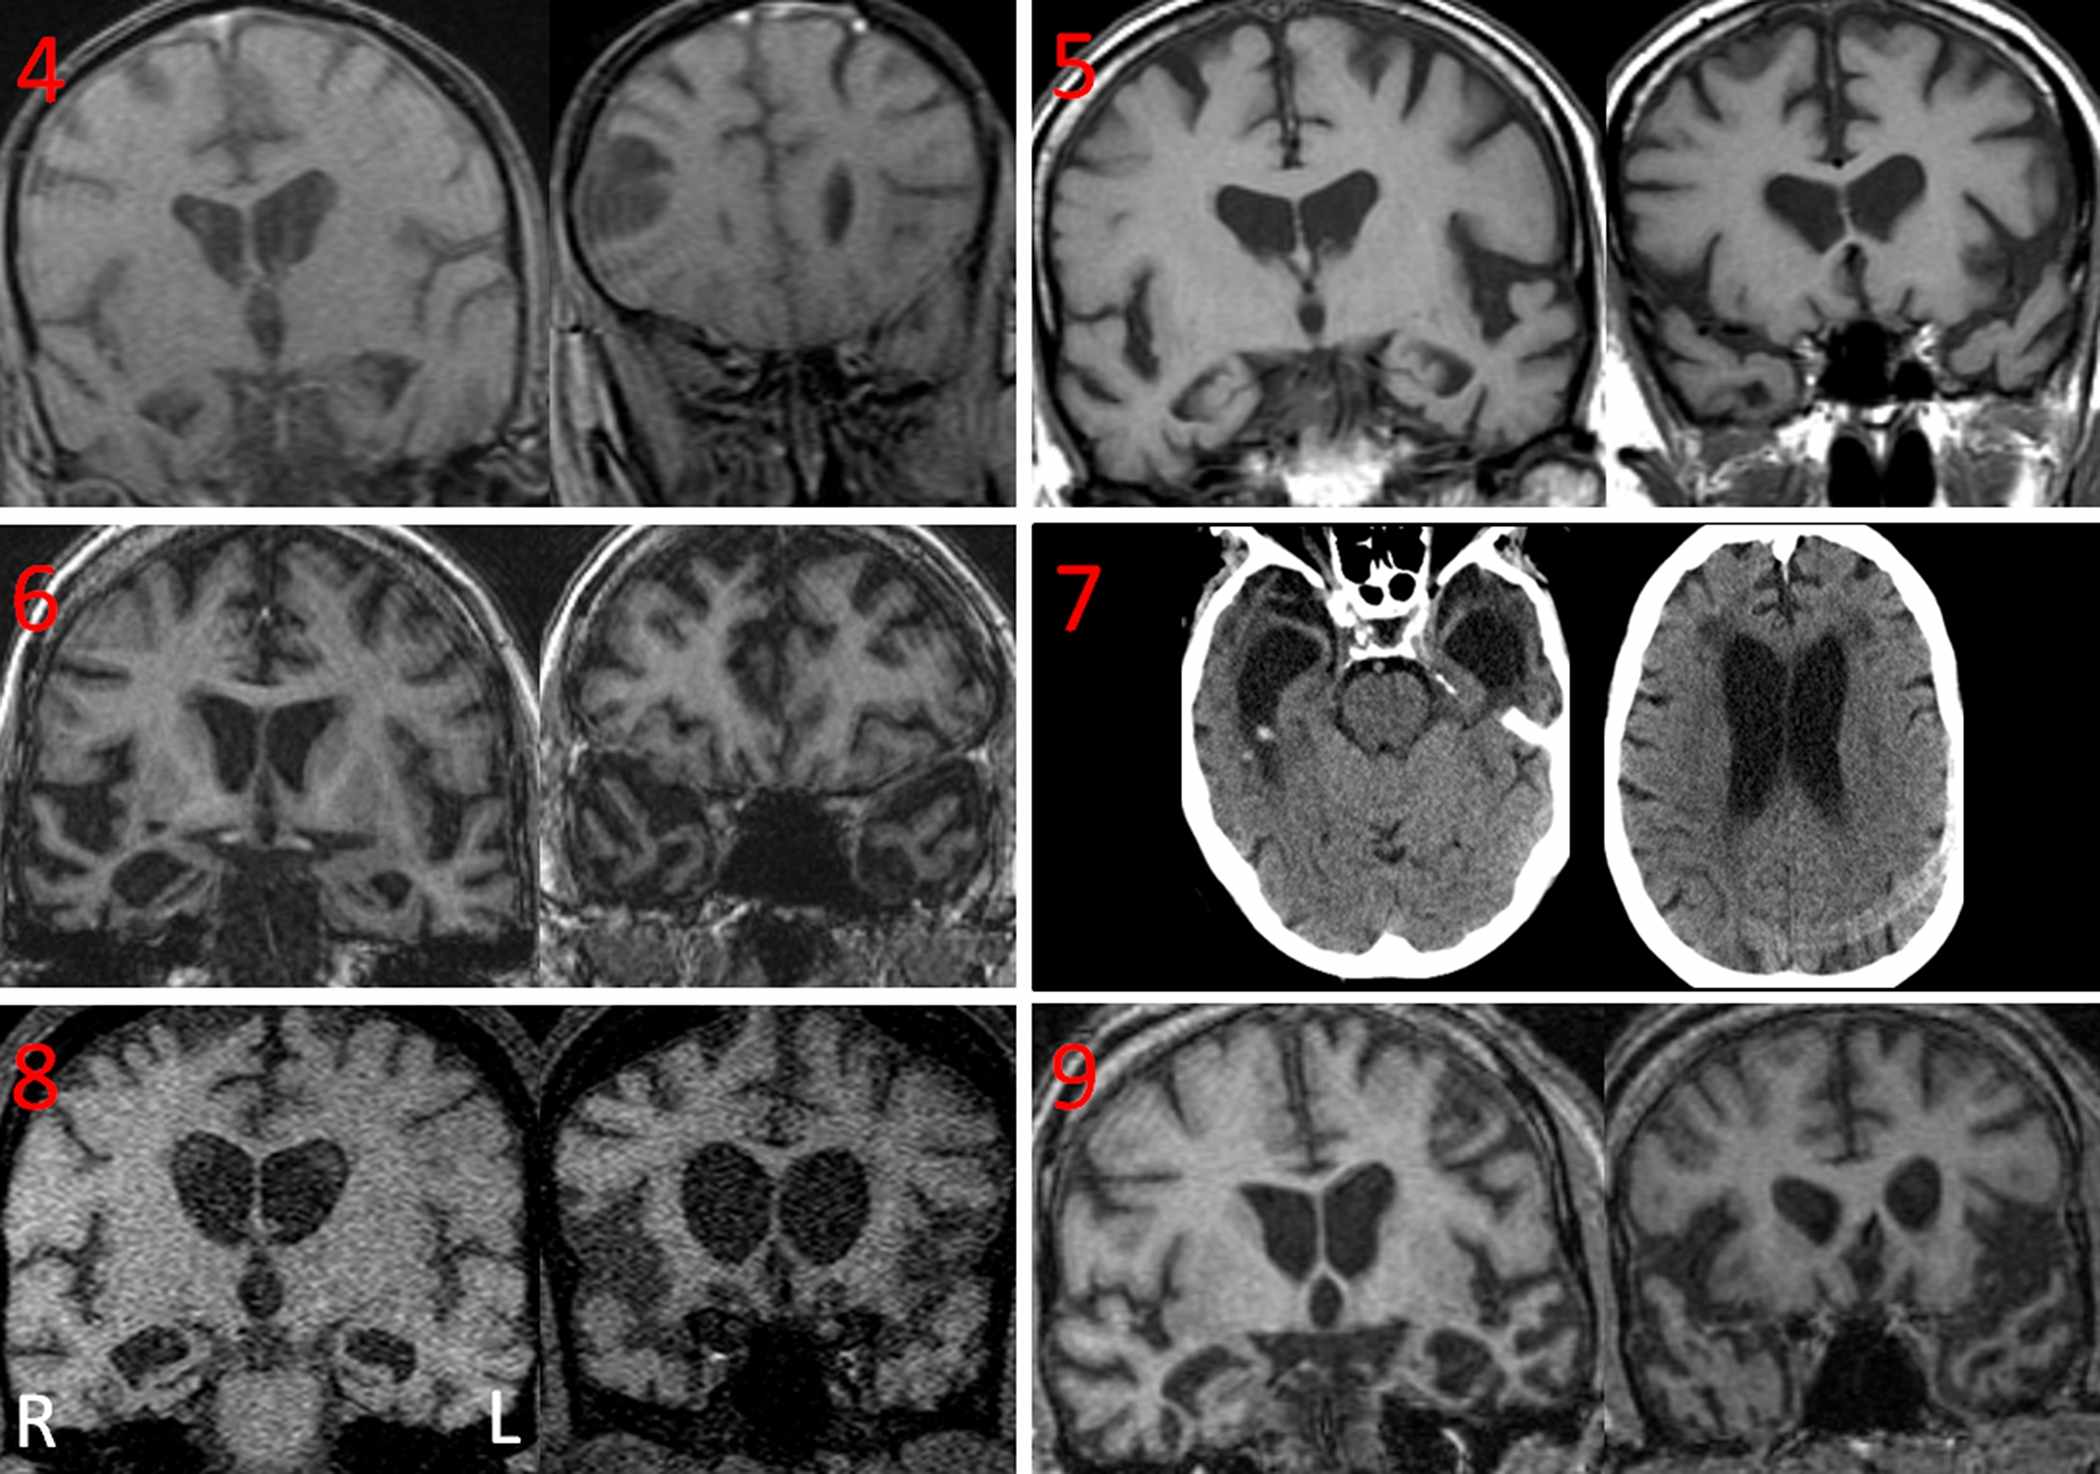 Brain scans of the six dementia patients who exhibited coprophagia showed medial temporal lobe atrophy, or degeneration